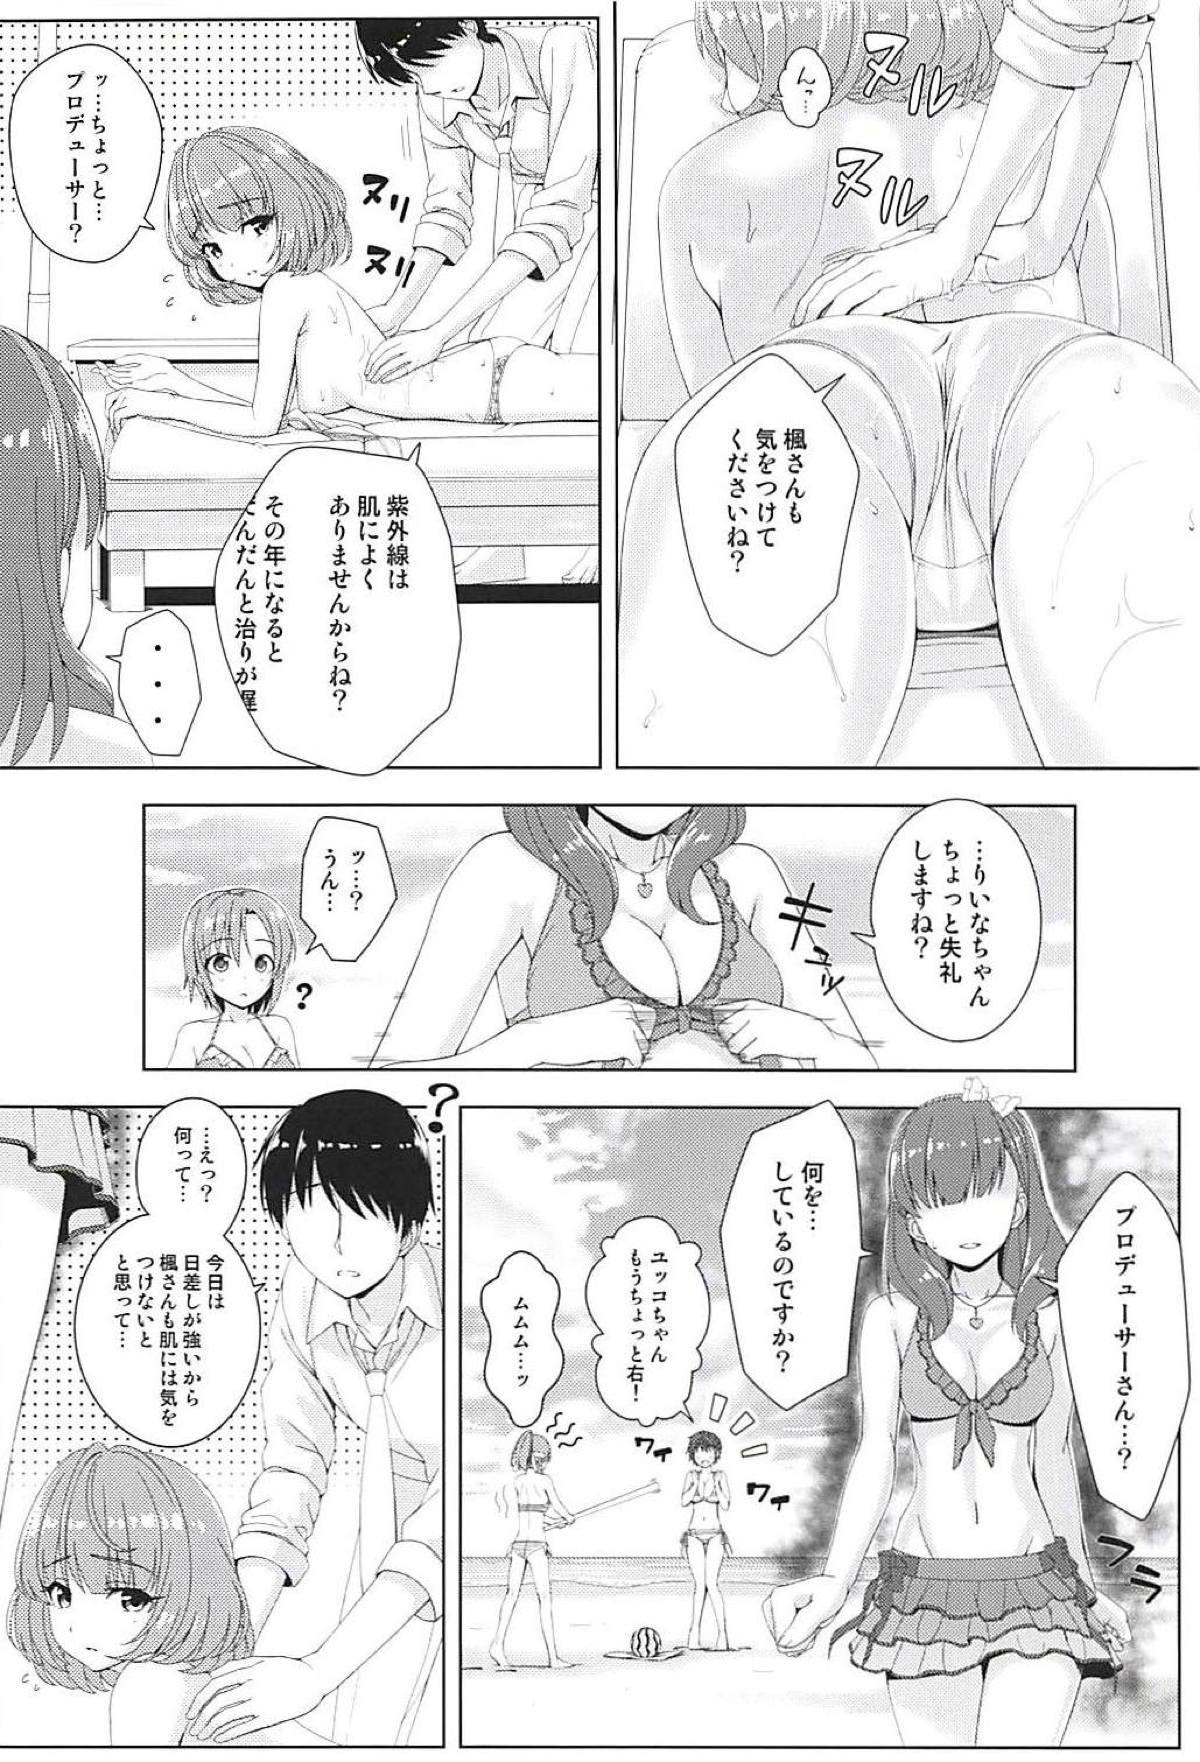 Pretty BAD COMMUNICATION? vol. 23 - The idolmaster Stripping - Page 11